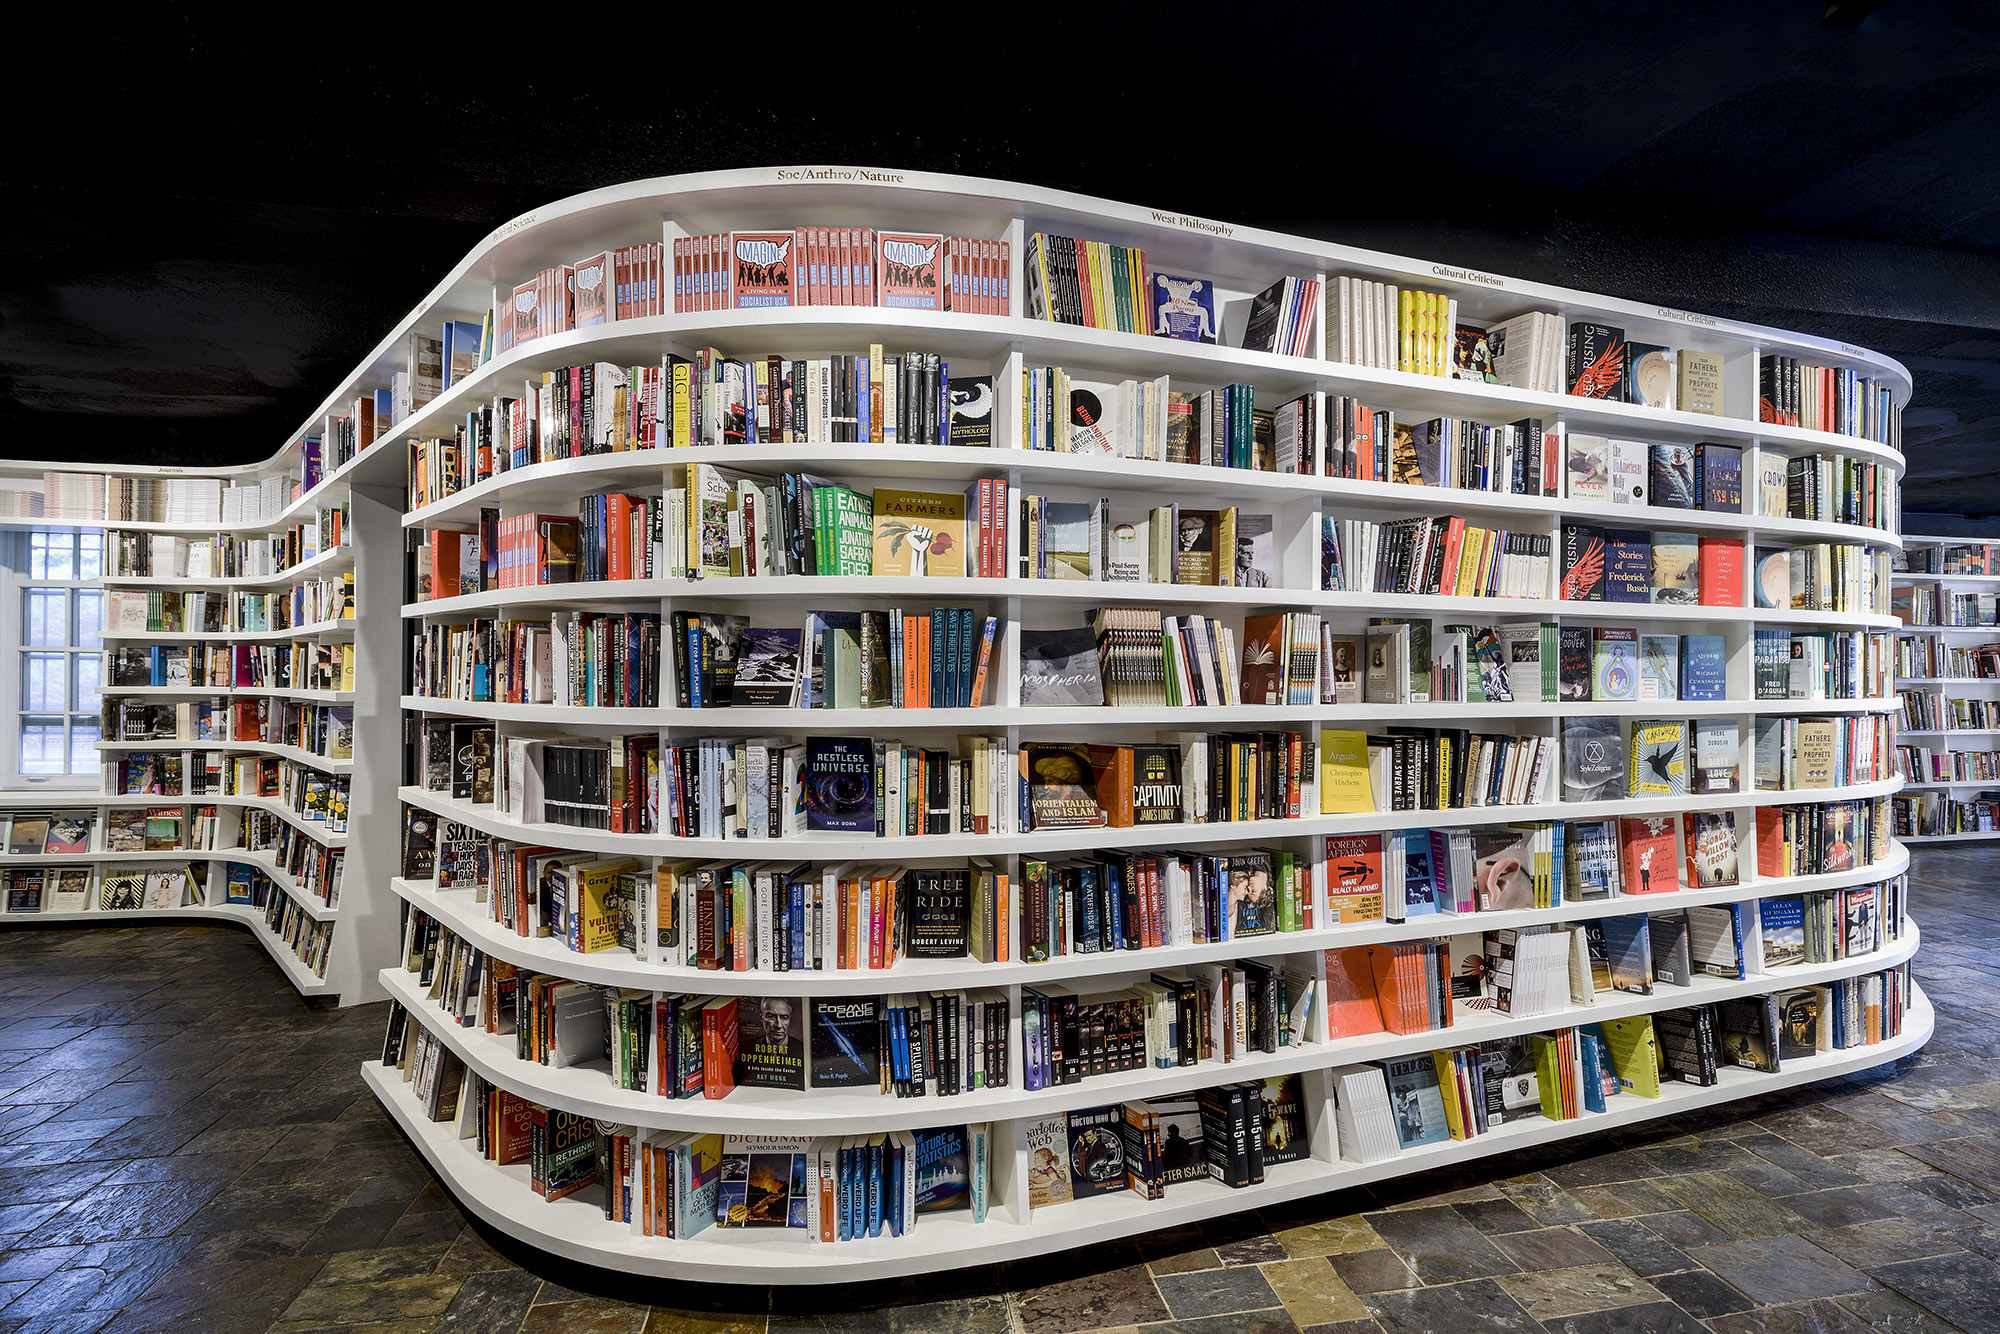 rounded bookshelves in a store